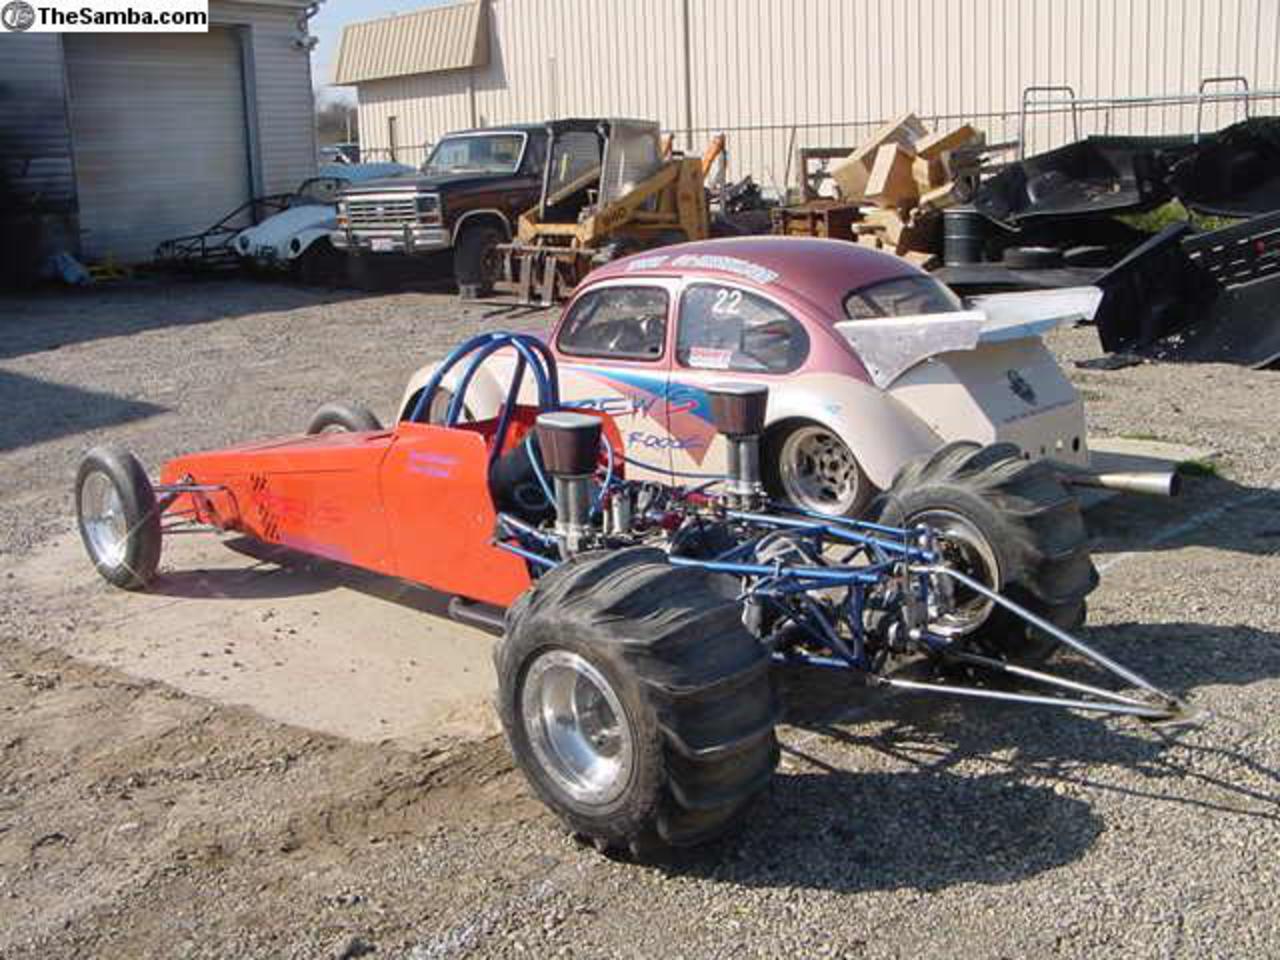 Volkswagen Sand Dragster. View Download Wallpaper. 640x480. Comments